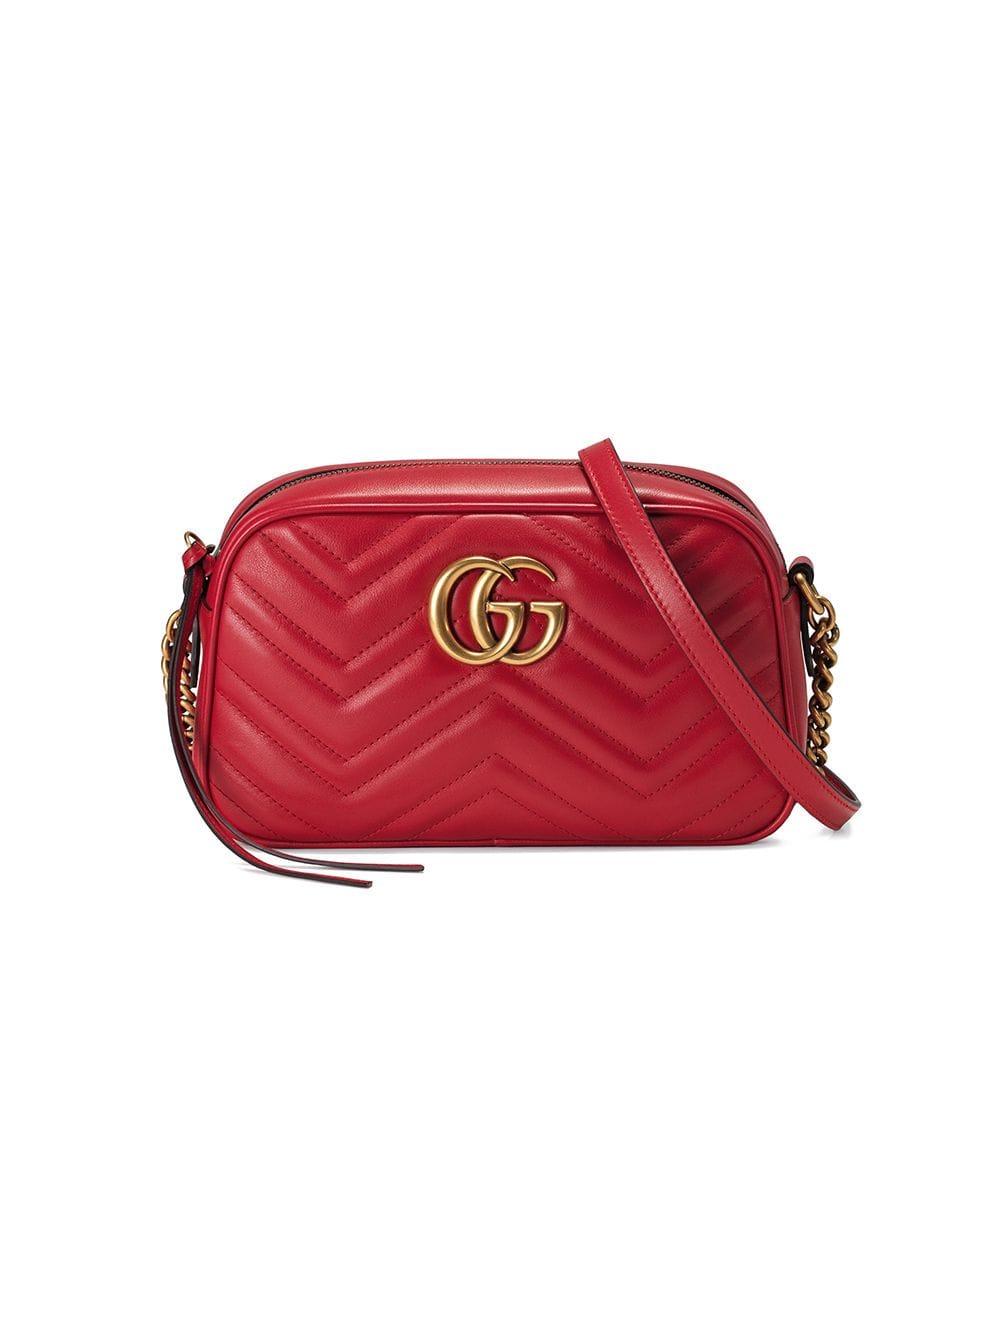 Gucci GG Marmont Small Matelassé Shoulder Bag in Red - Lyst